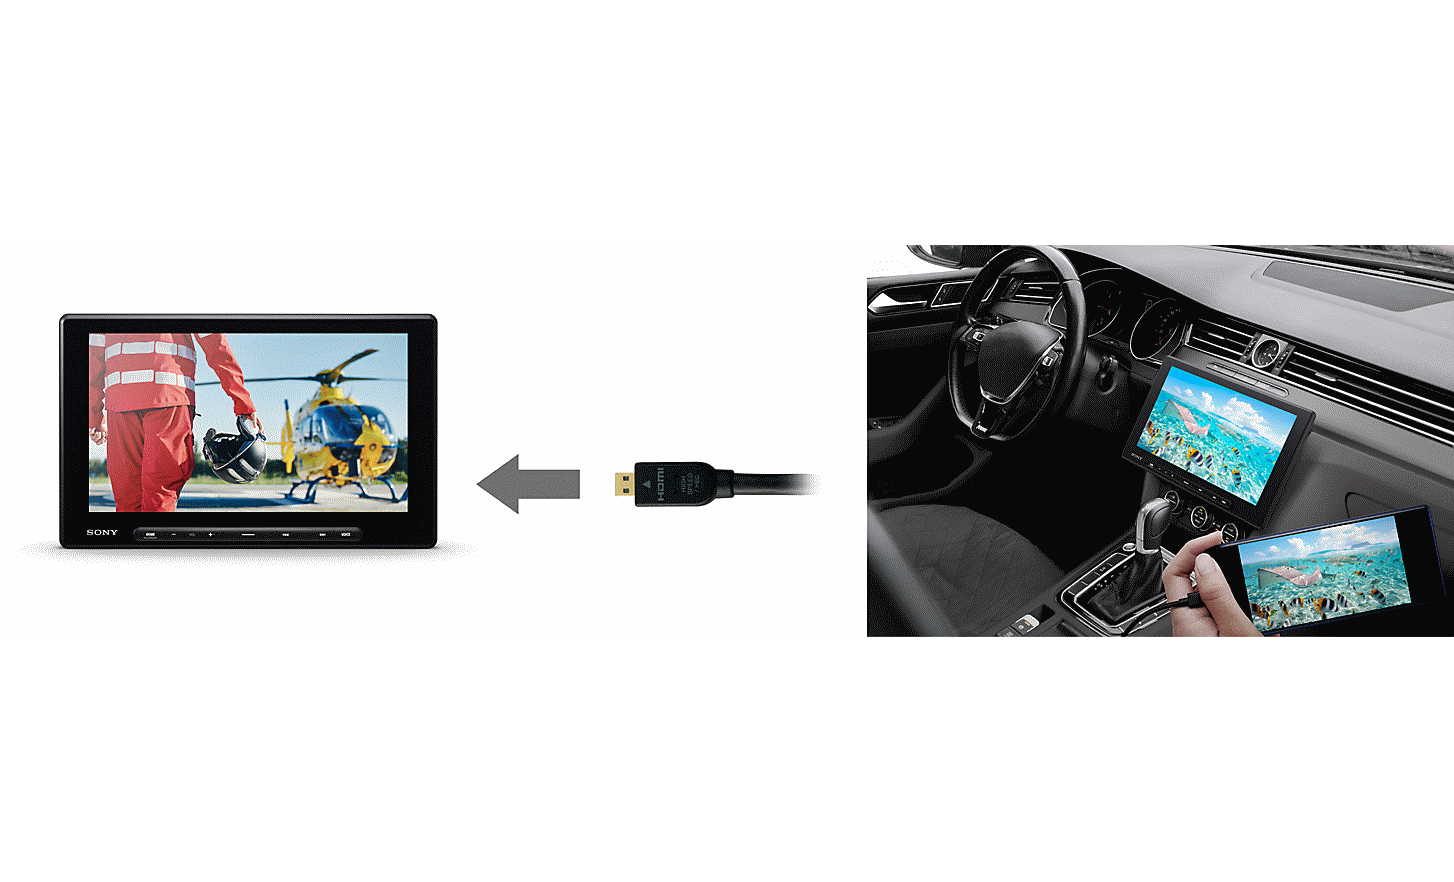 The XAV-AX8500 in a dashboard with a phone connected and an image of an HDMI cable with an arrow point to another XAV-AX8500